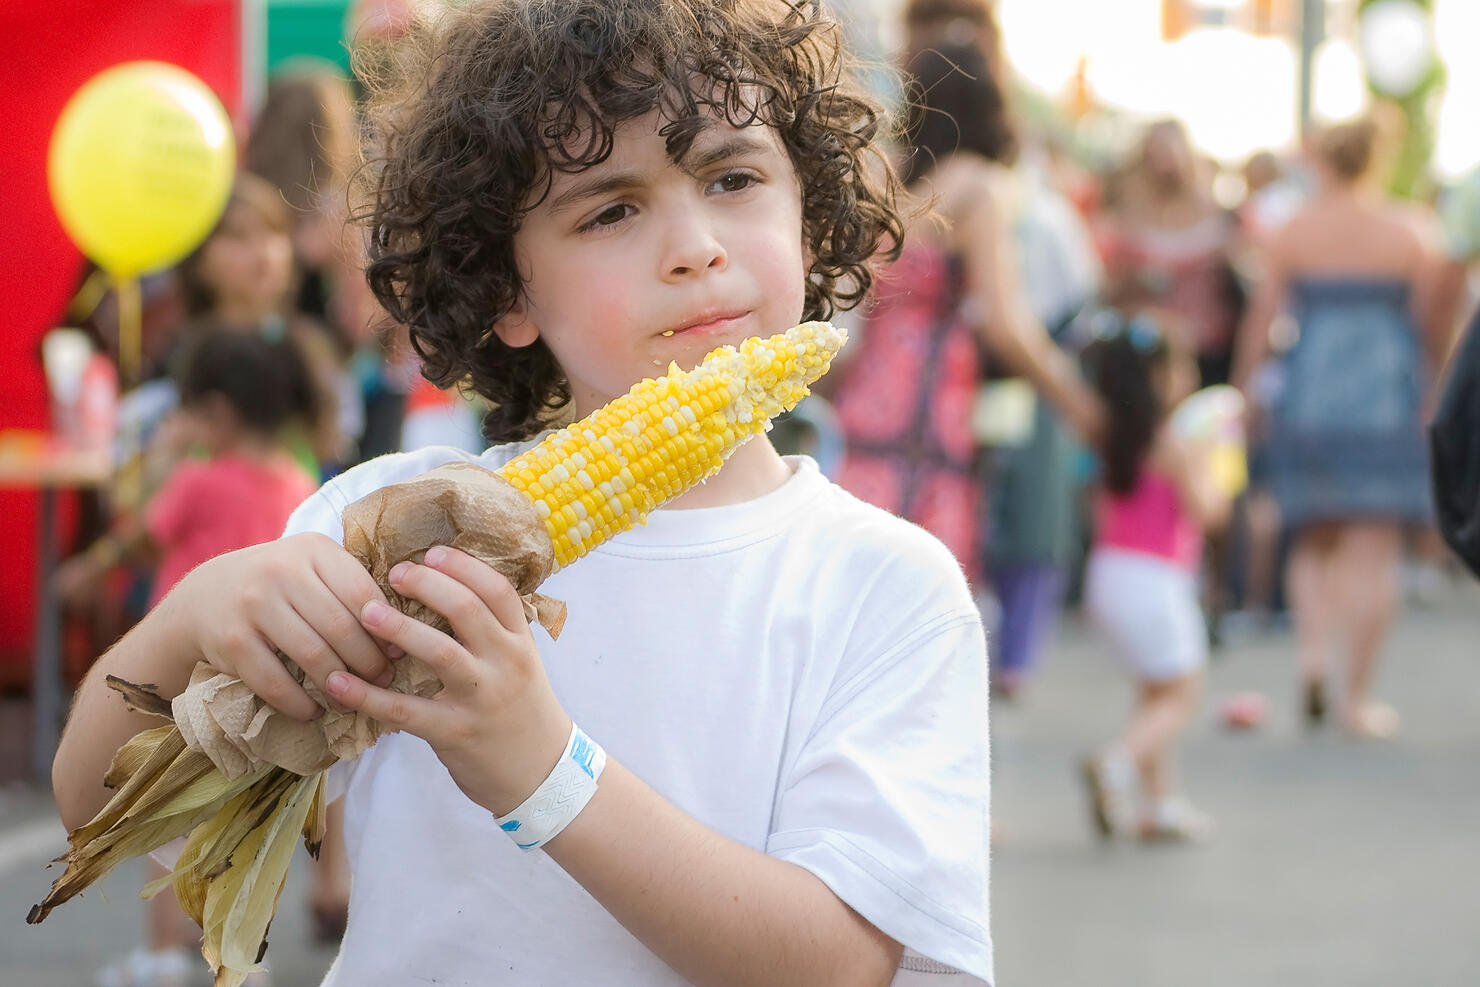 Child eating corn on the cob in a street festival